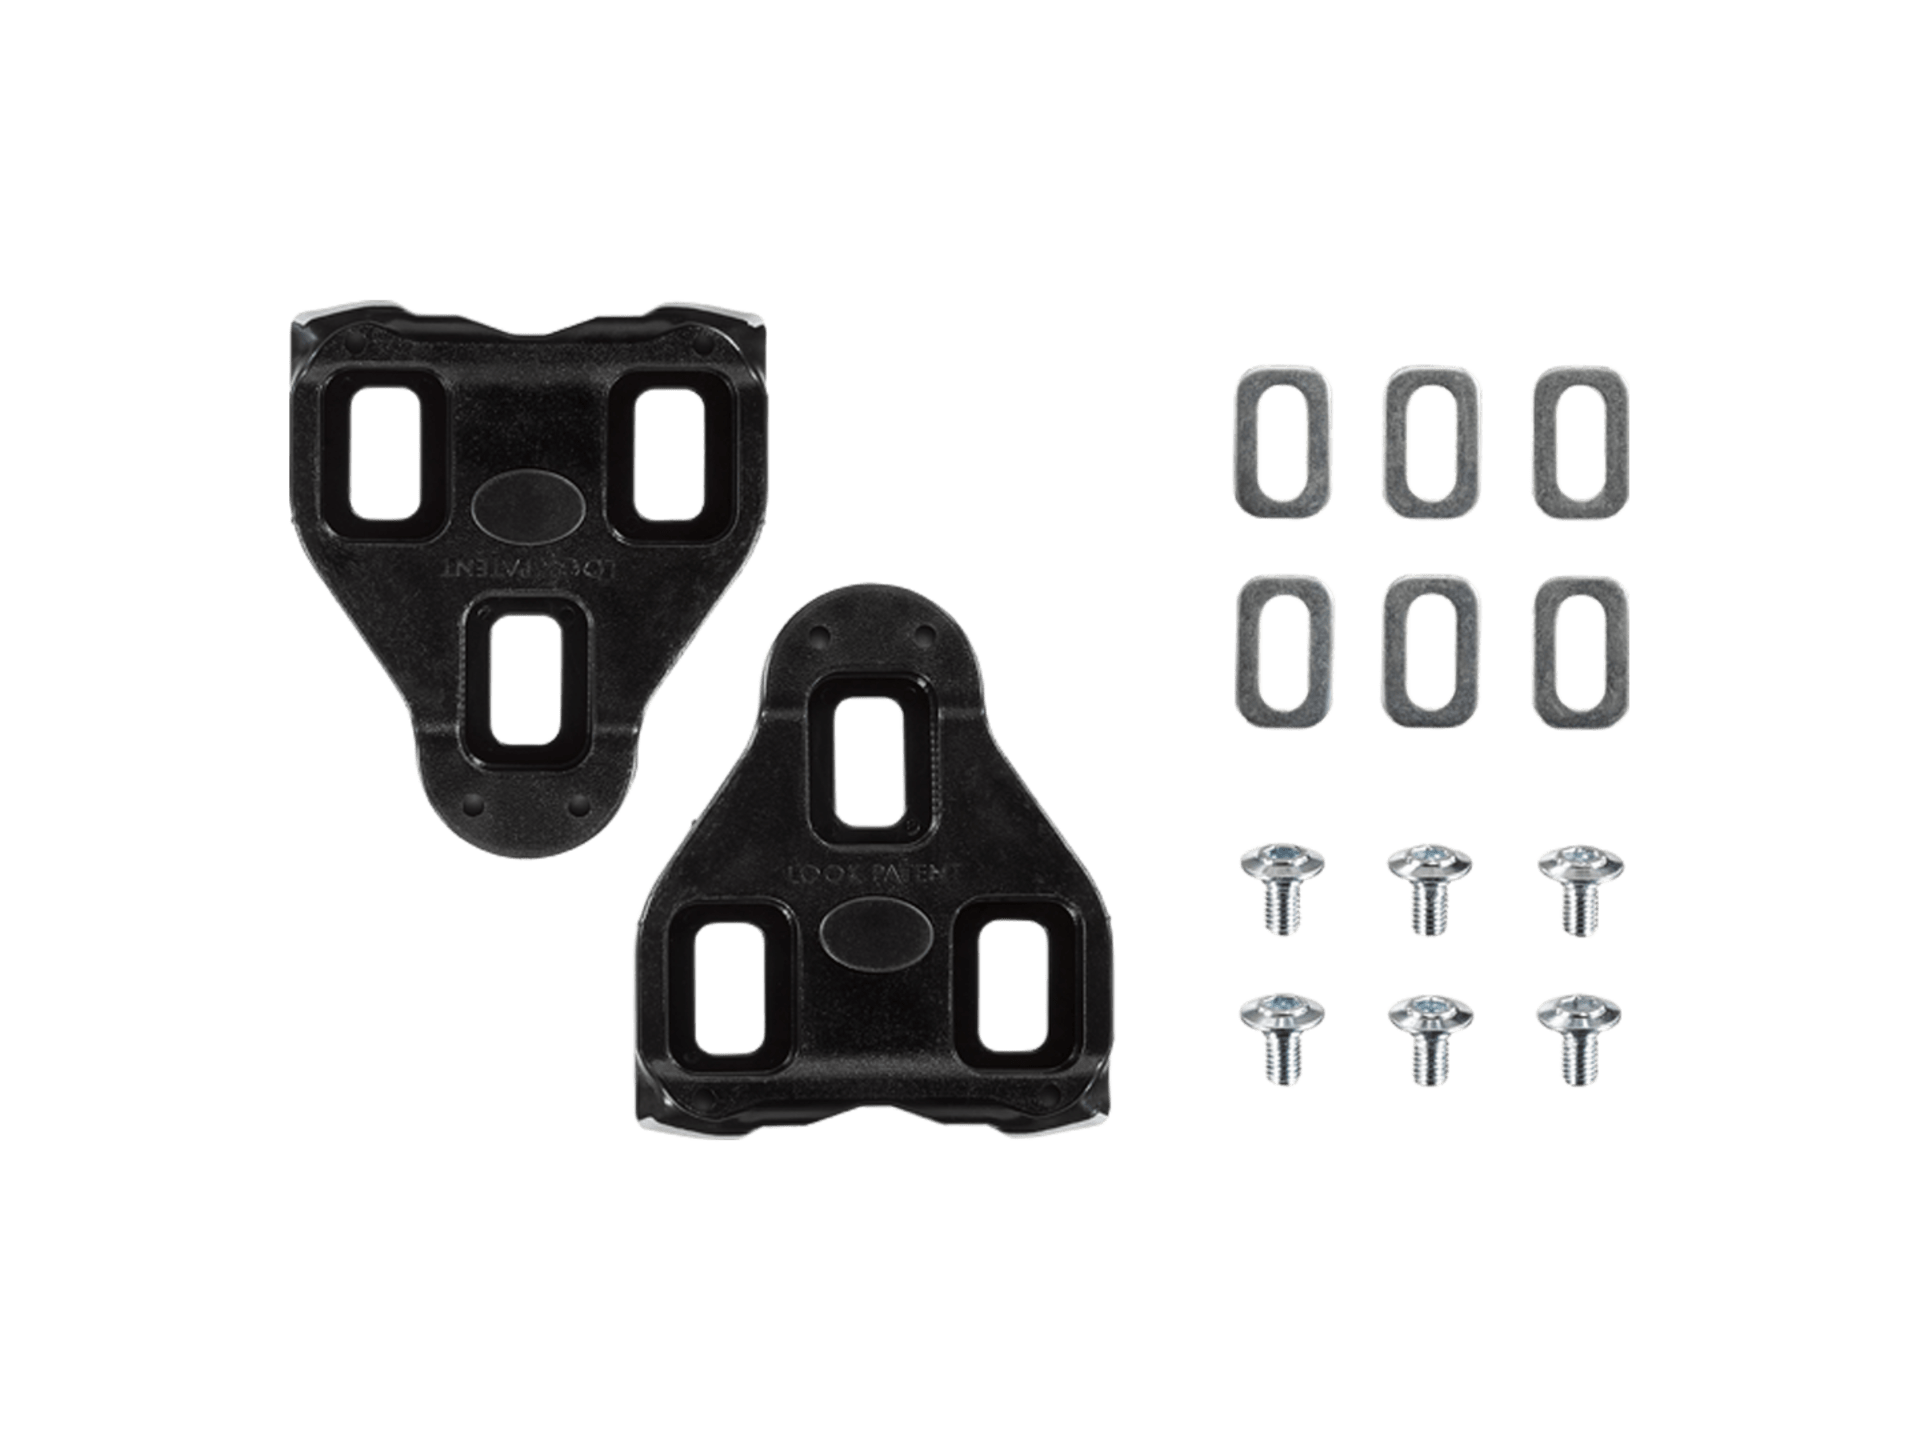 LOOK Delta -Degree Road Pedal Cleat Set